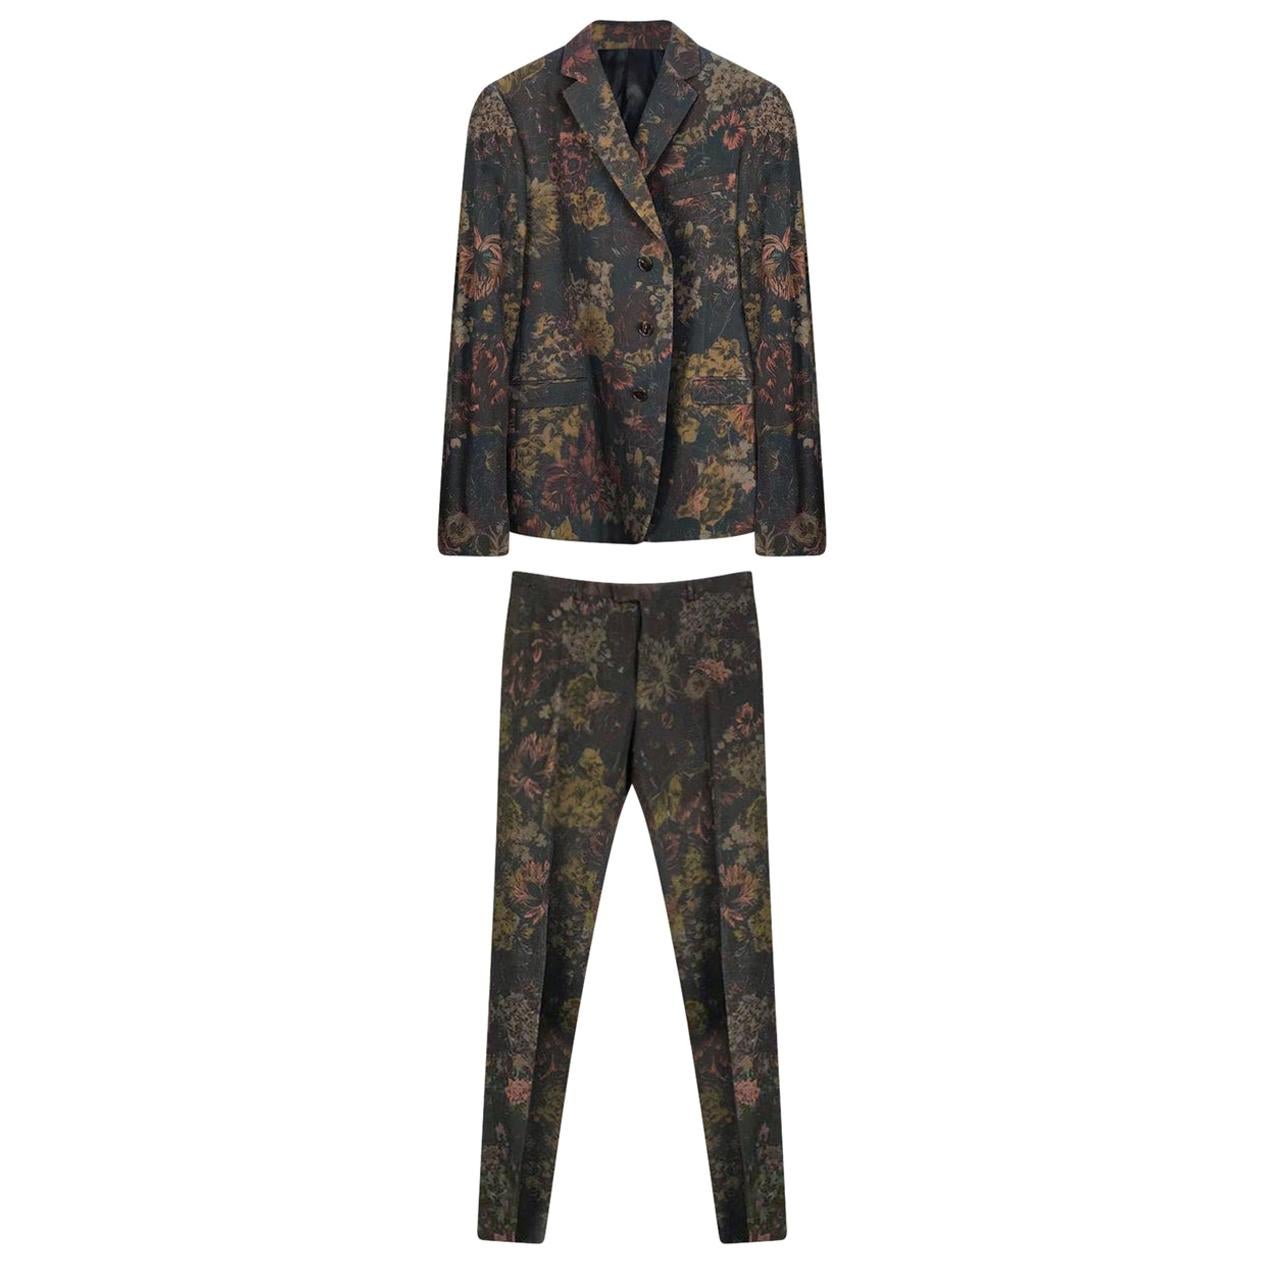 F/W 2012 Look #1 Floral Printed Suit for Men 58 - 48